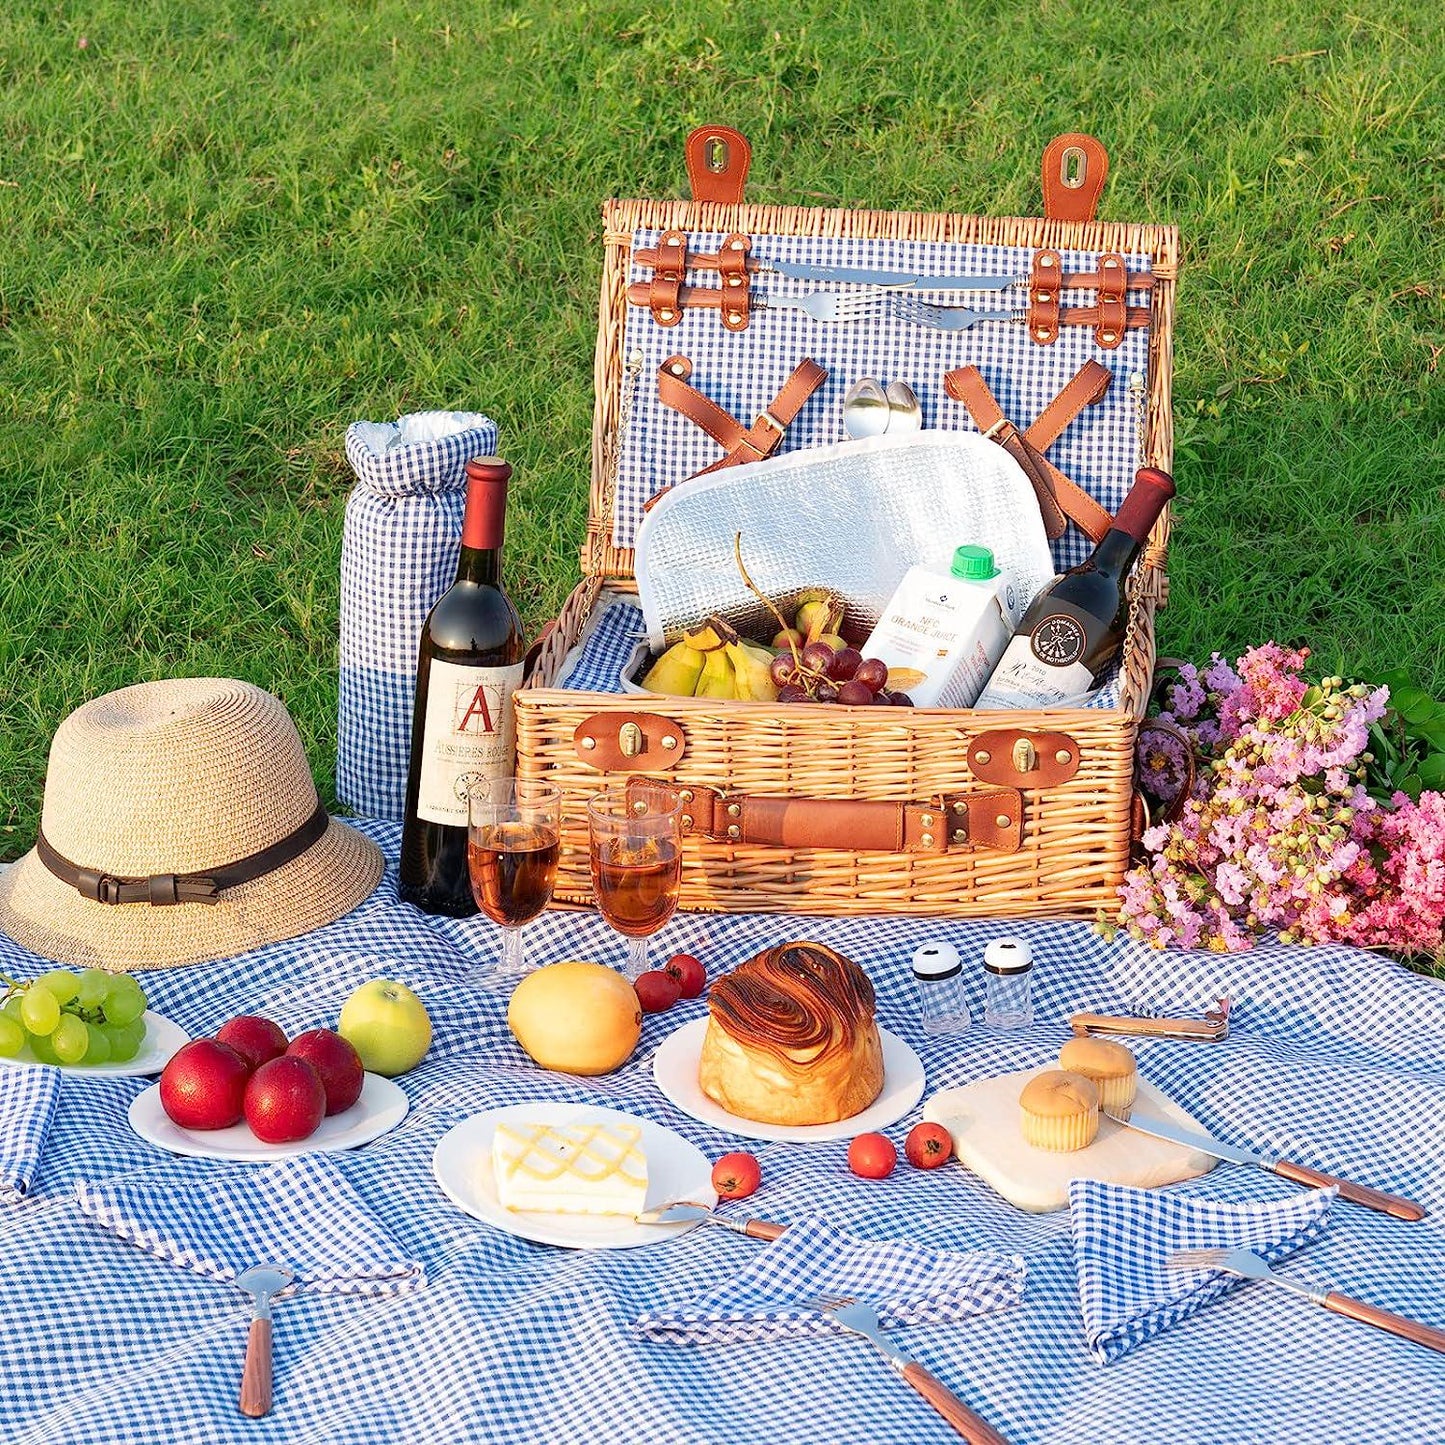 DHAEE Wicker Picnic Basket Set for 4 Person with Cooler Compartment and Waterproof Picnic Blanket,Removable Strap,Wine Bag,Cutlery Set,for Camping